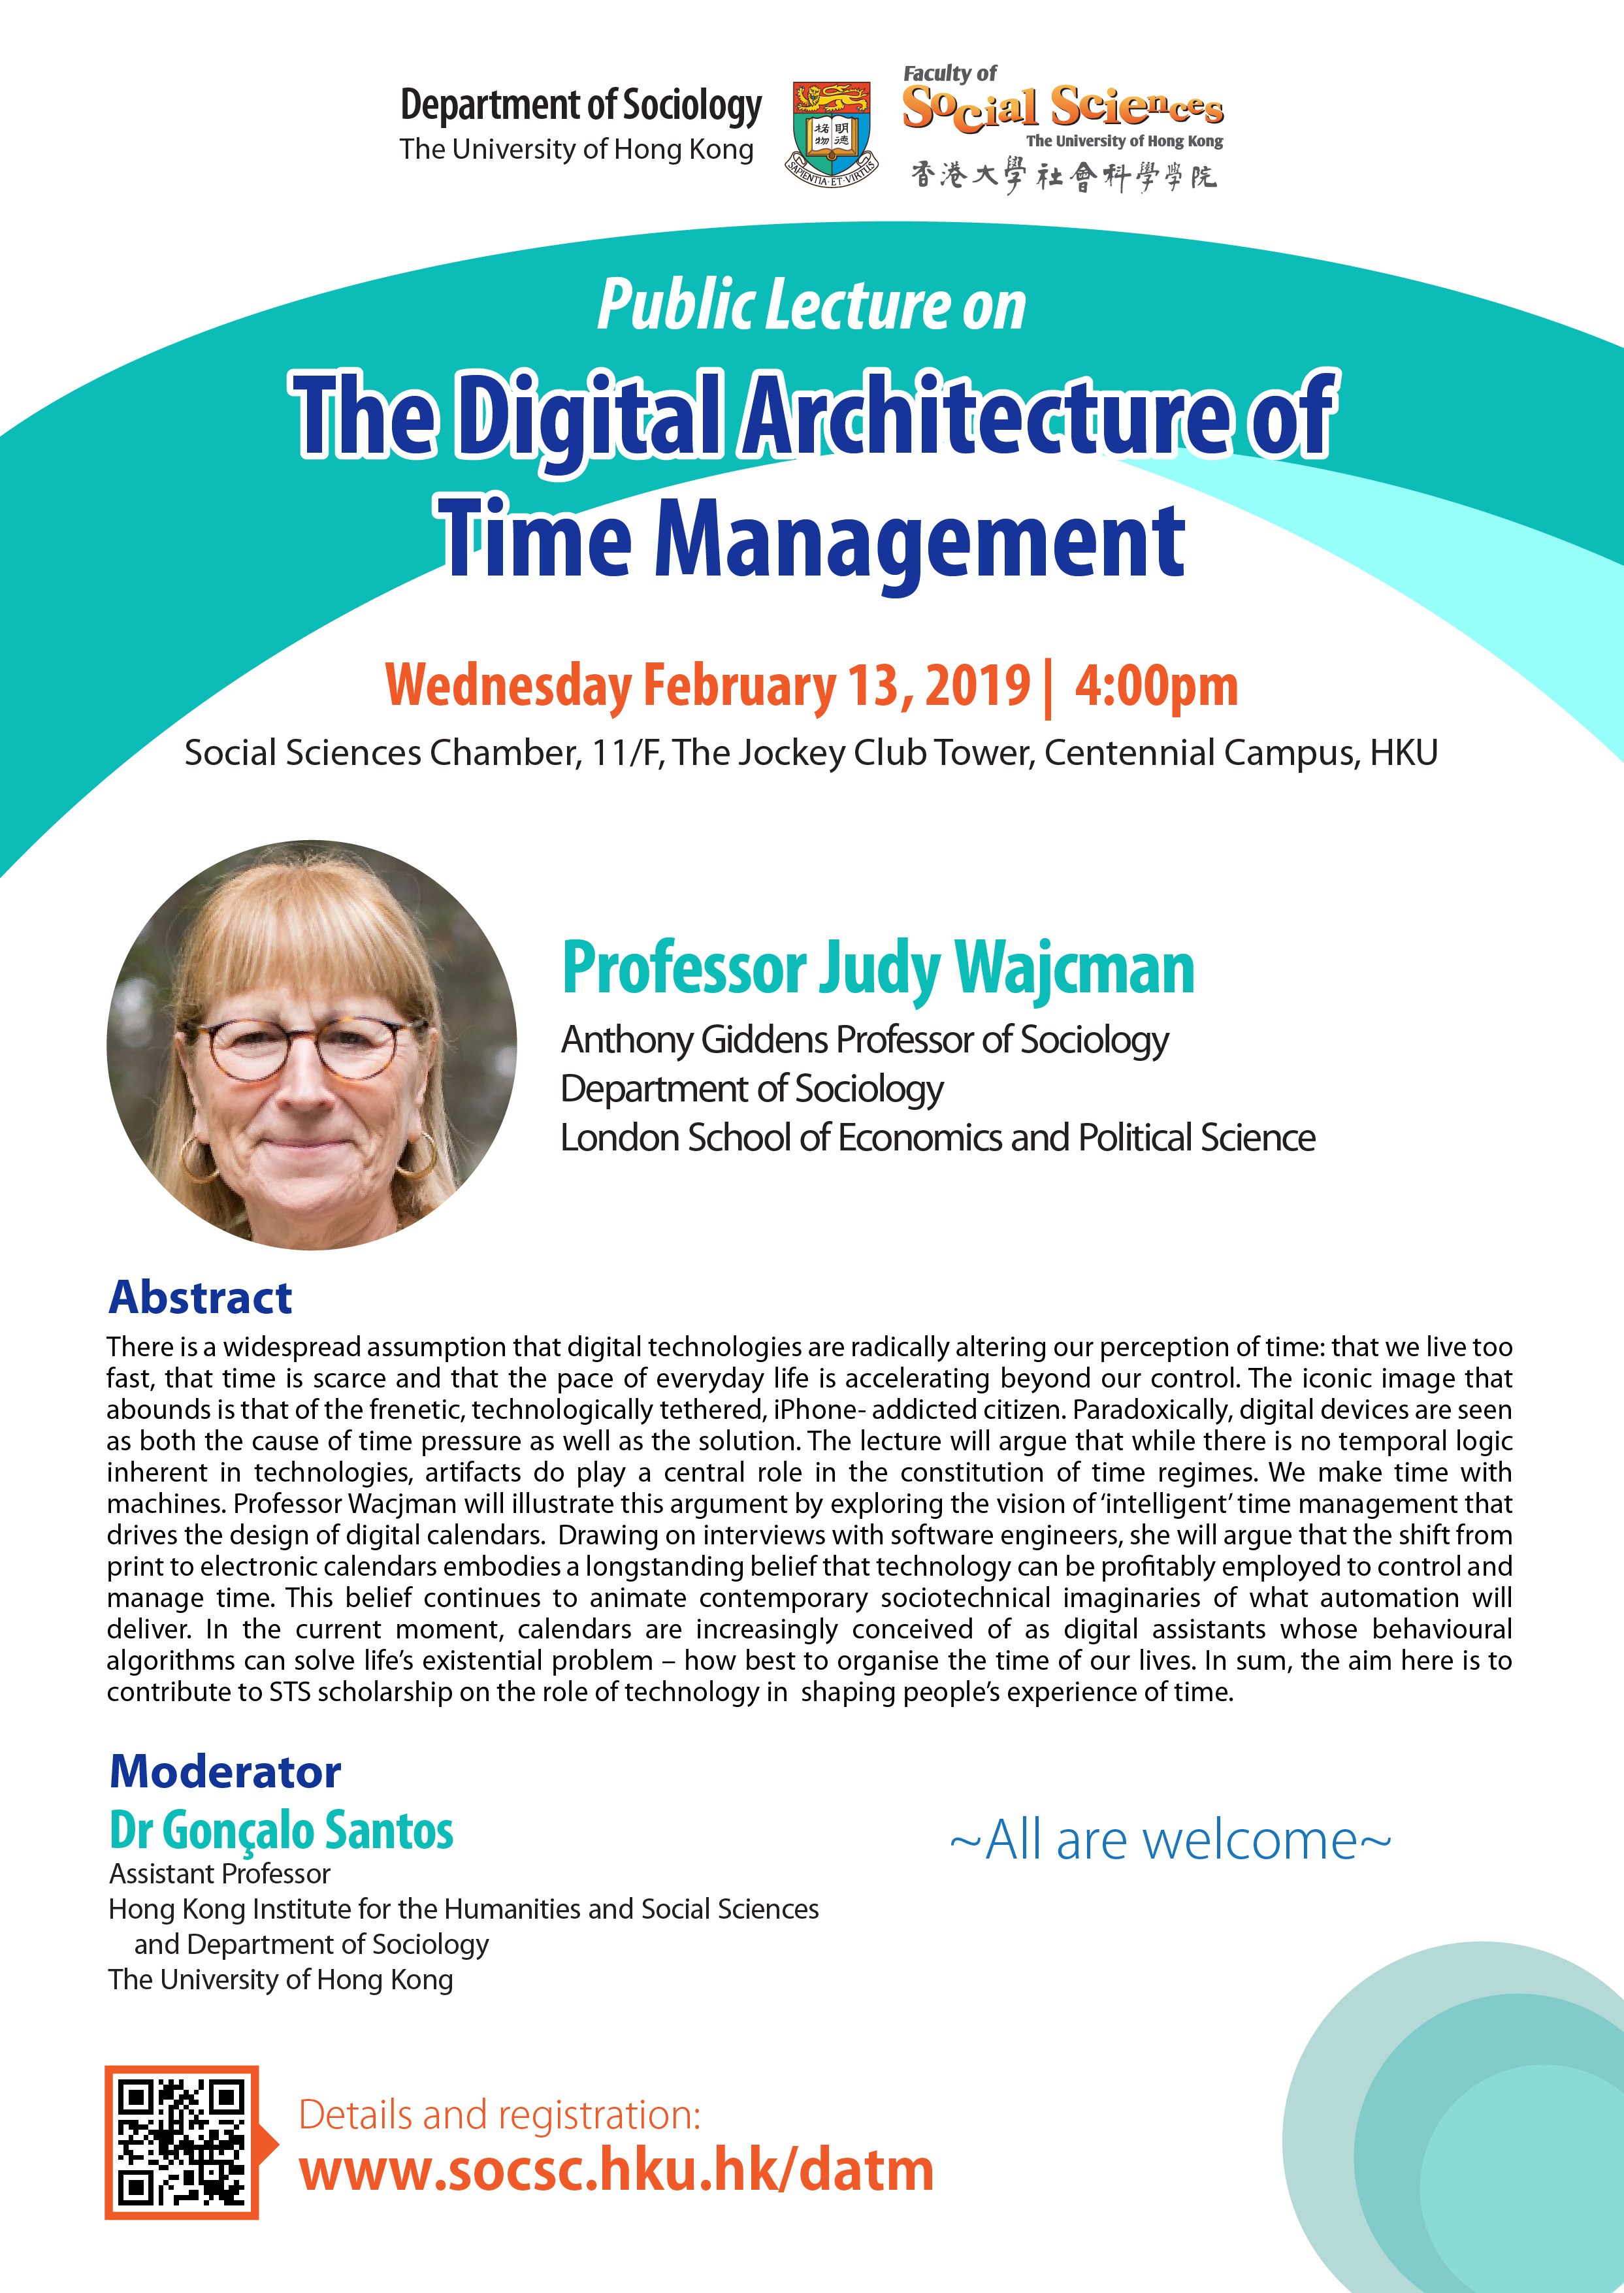 Public Lecture on The Digital Architecture of Time Management